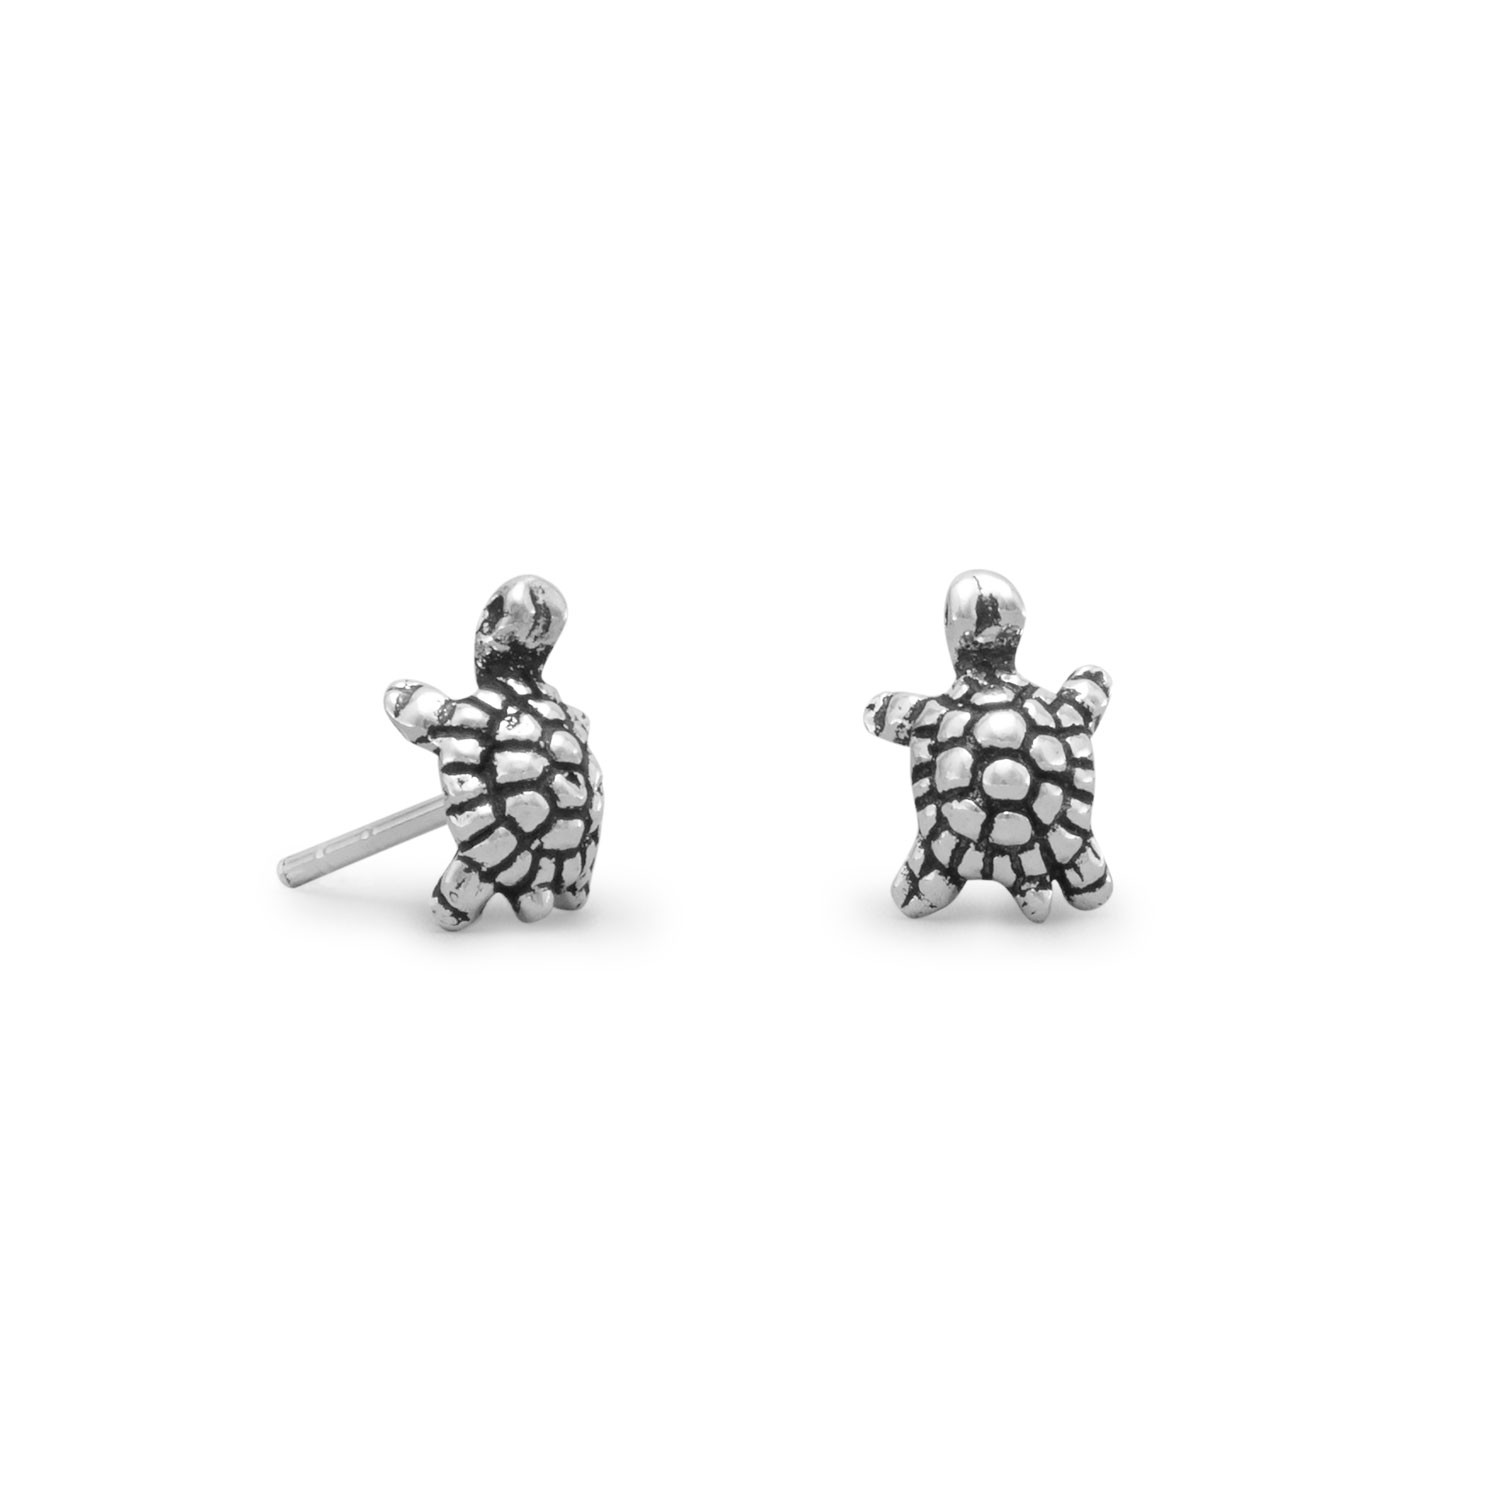 Turtle Earrings Sterling Silver | kandsimpressions